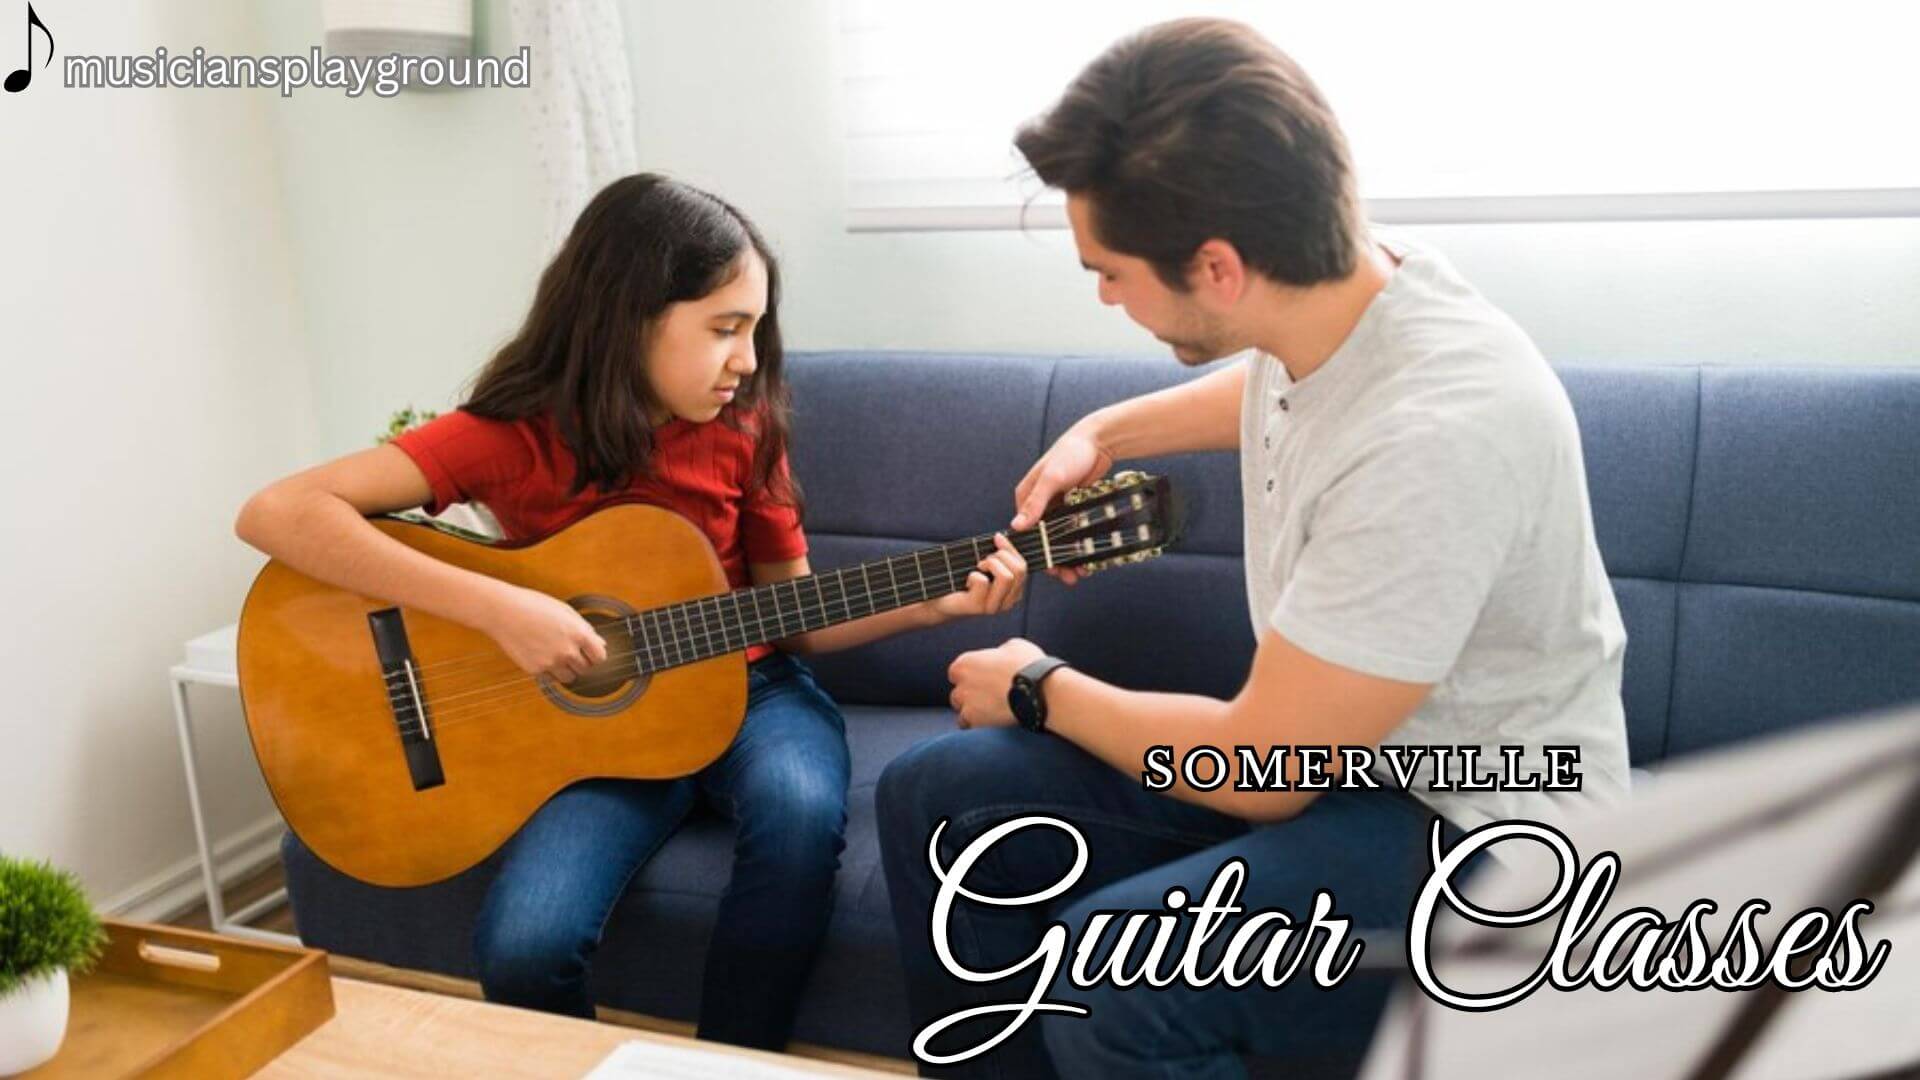 Learn to Play Guitar at Guitar Classes in Somerville, Massachusetts